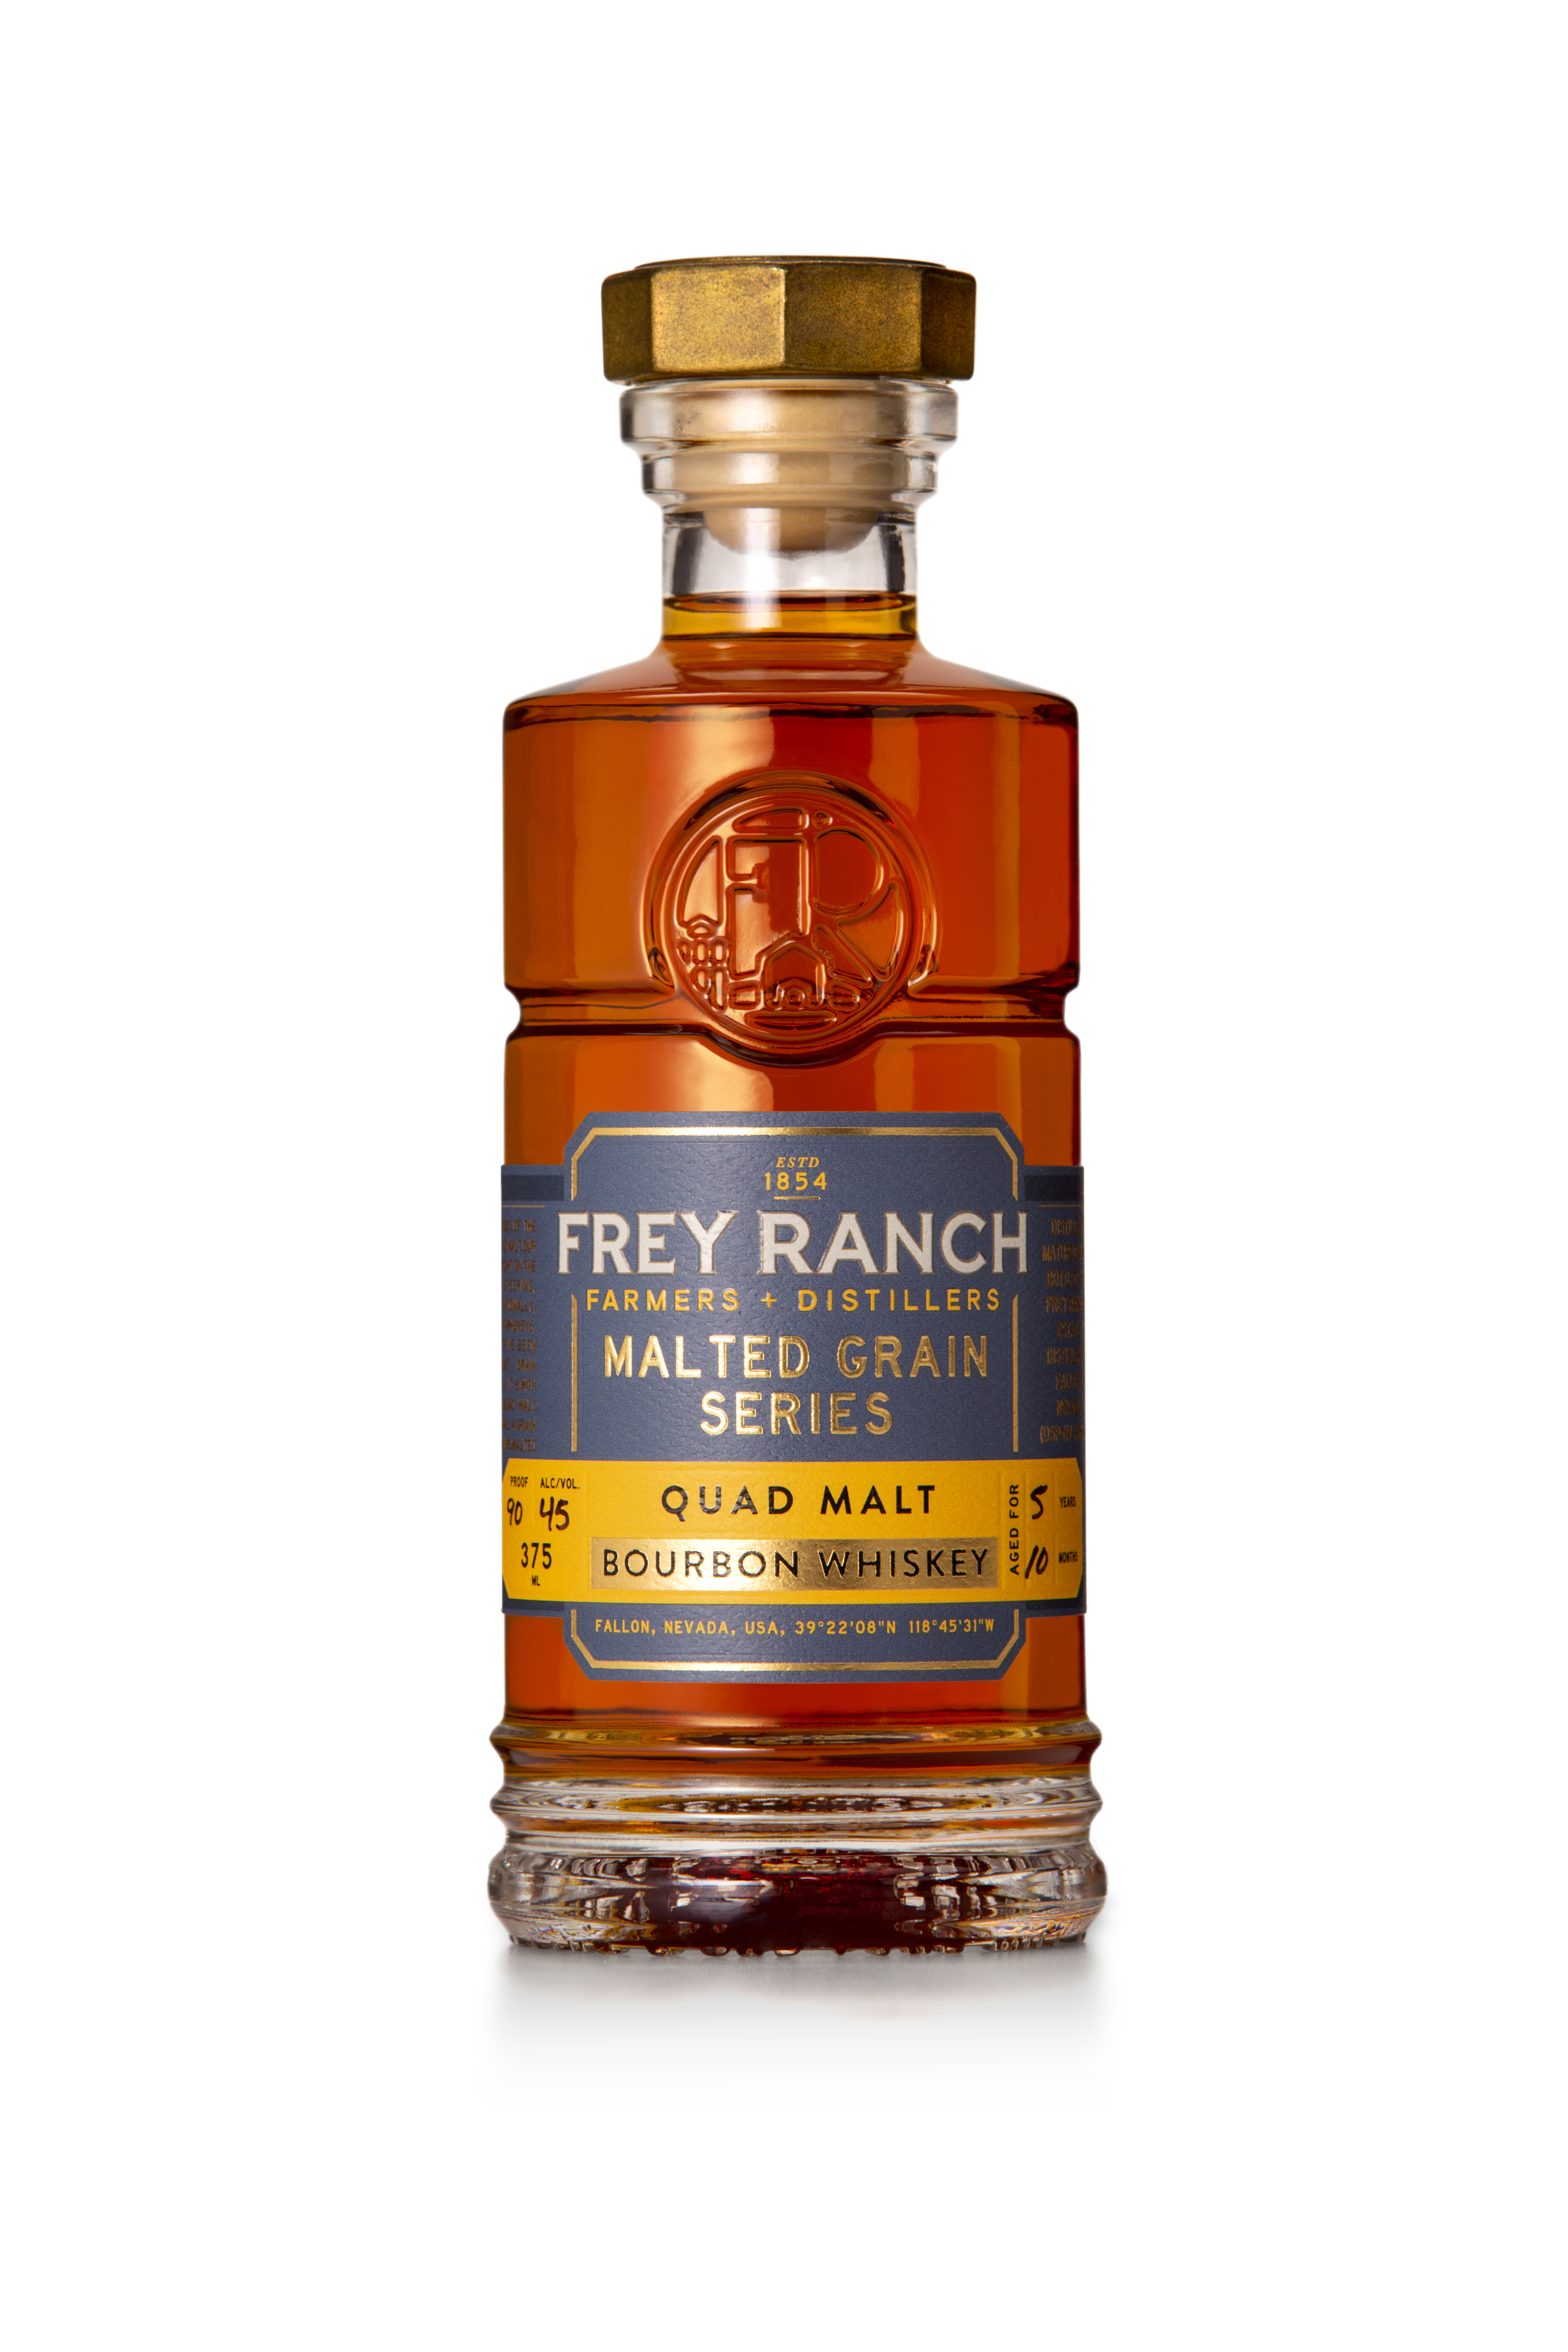 Frey Ranch Malted Grain Series: Introduces New Innovation